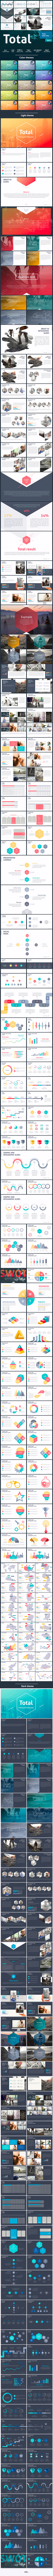 Total Powerpoint Template